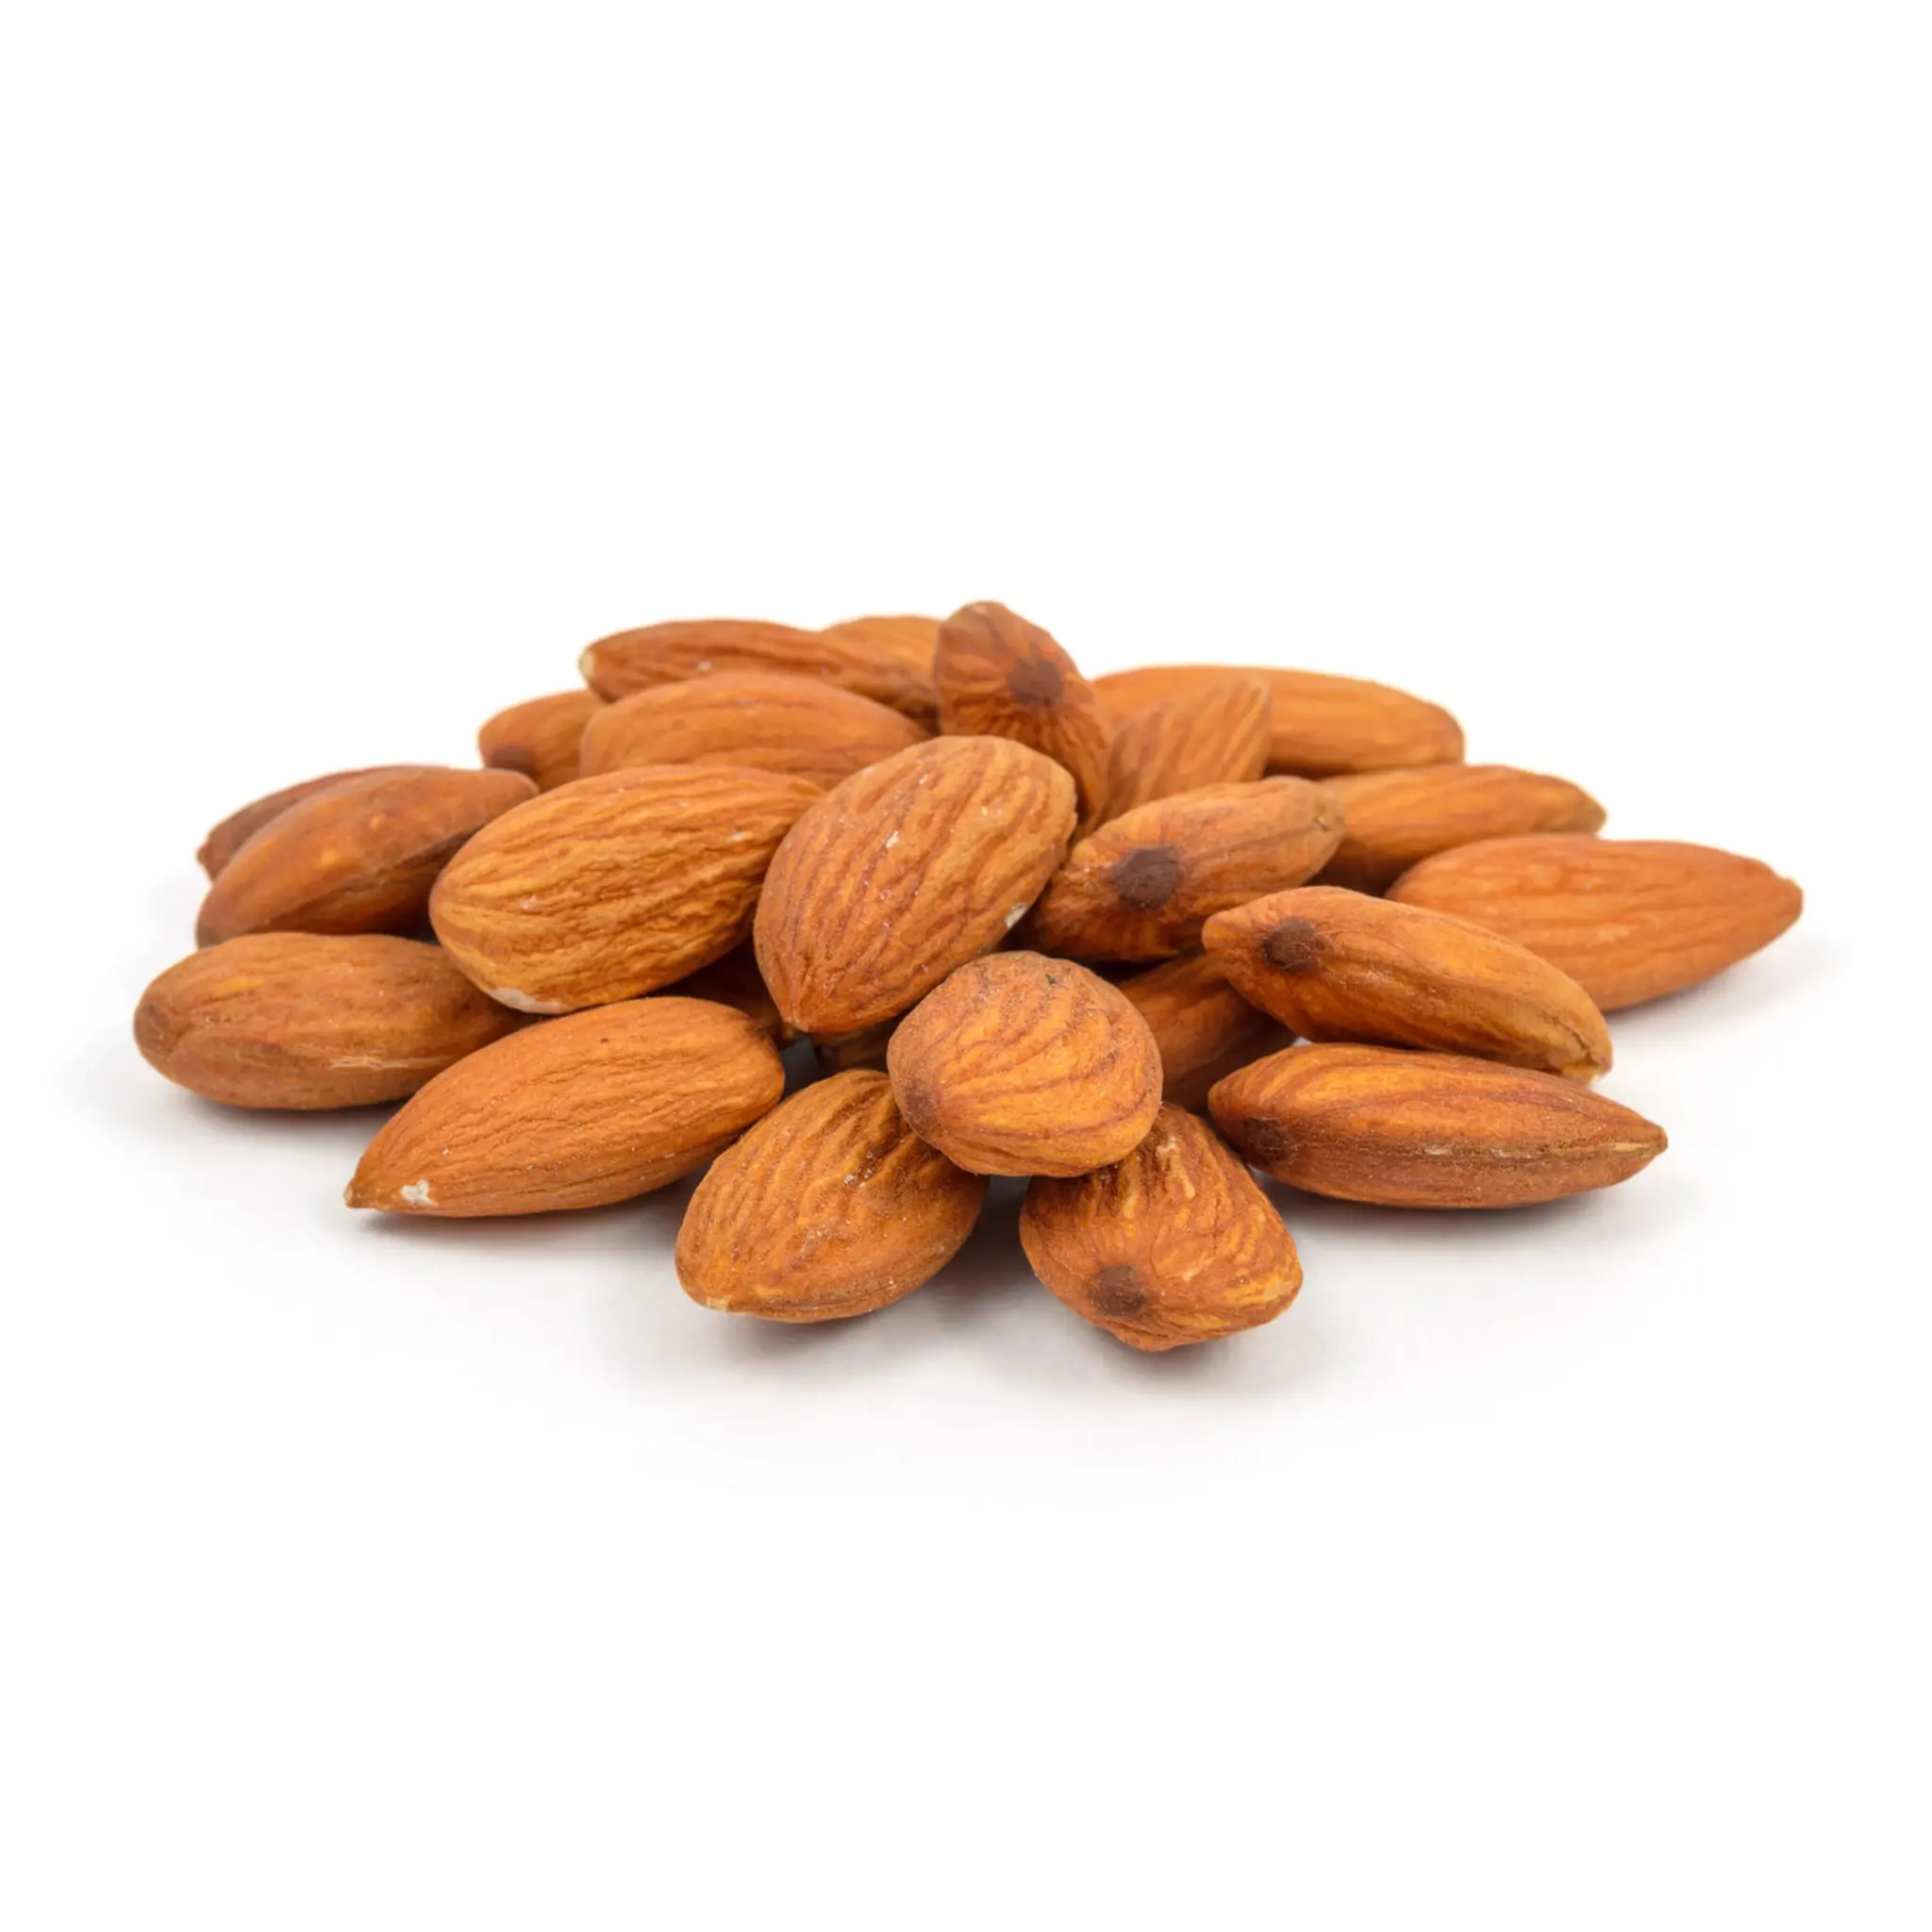 Dried Almond seeds, Sweet California Almonds, Raw Almonds Nuts Baked Almonds for bulk supply